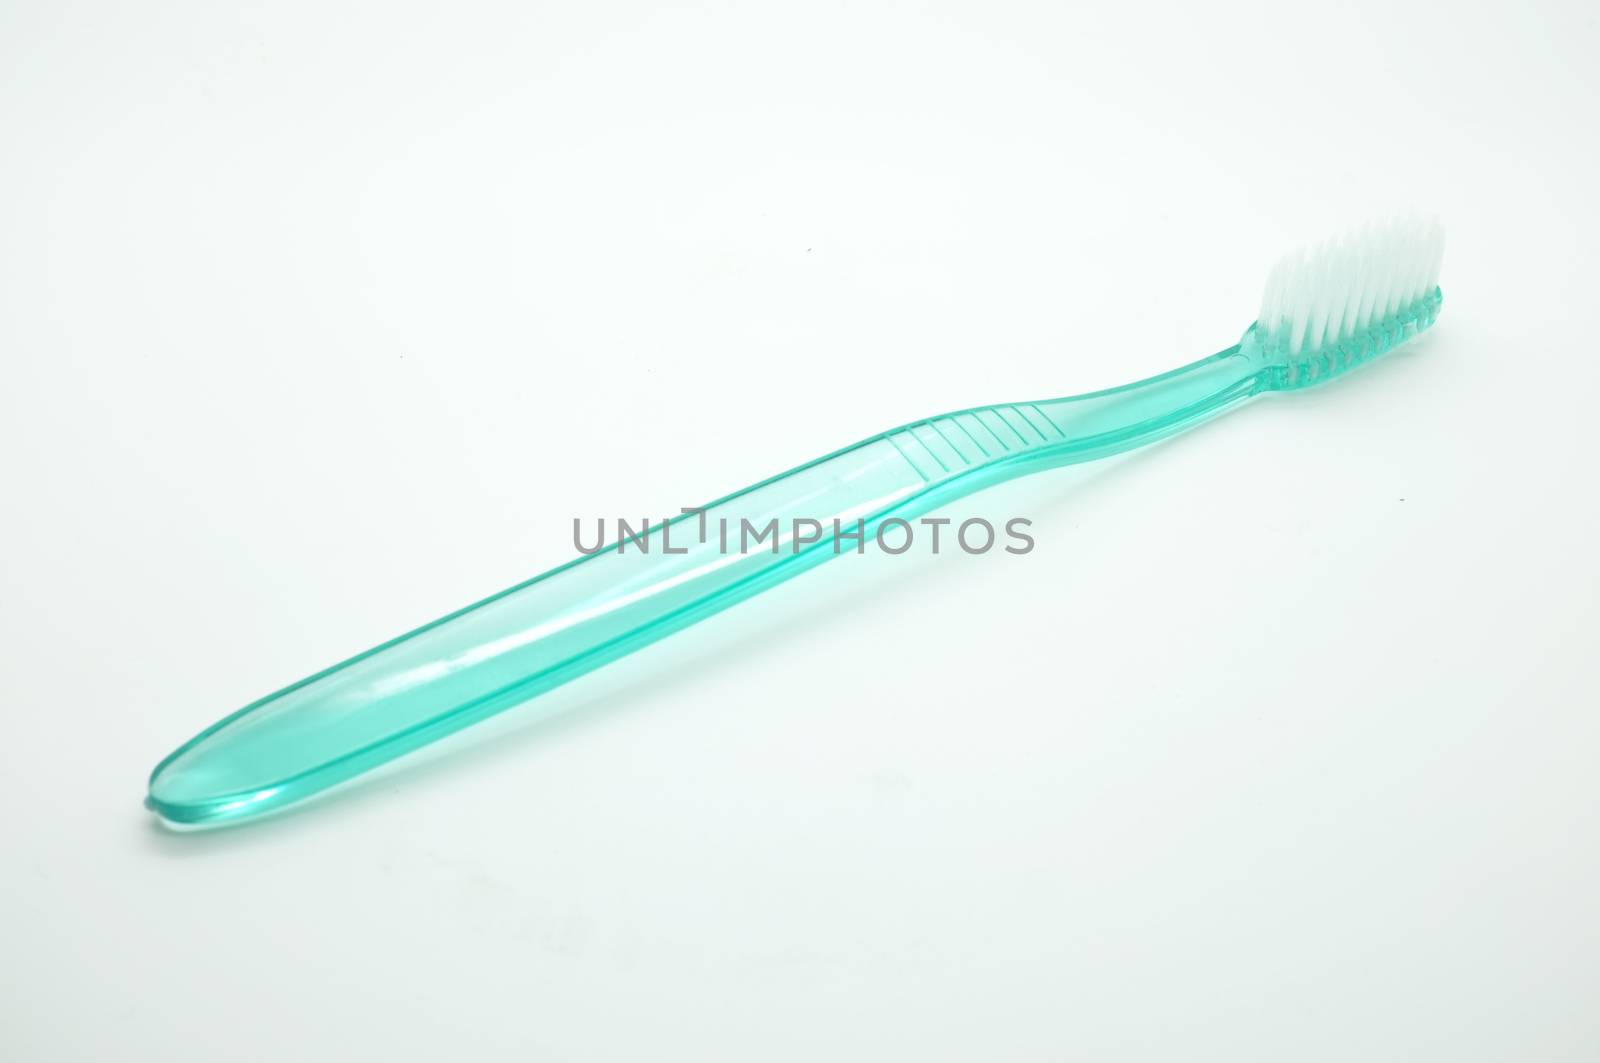 Toothbrush on white background by Hepjam